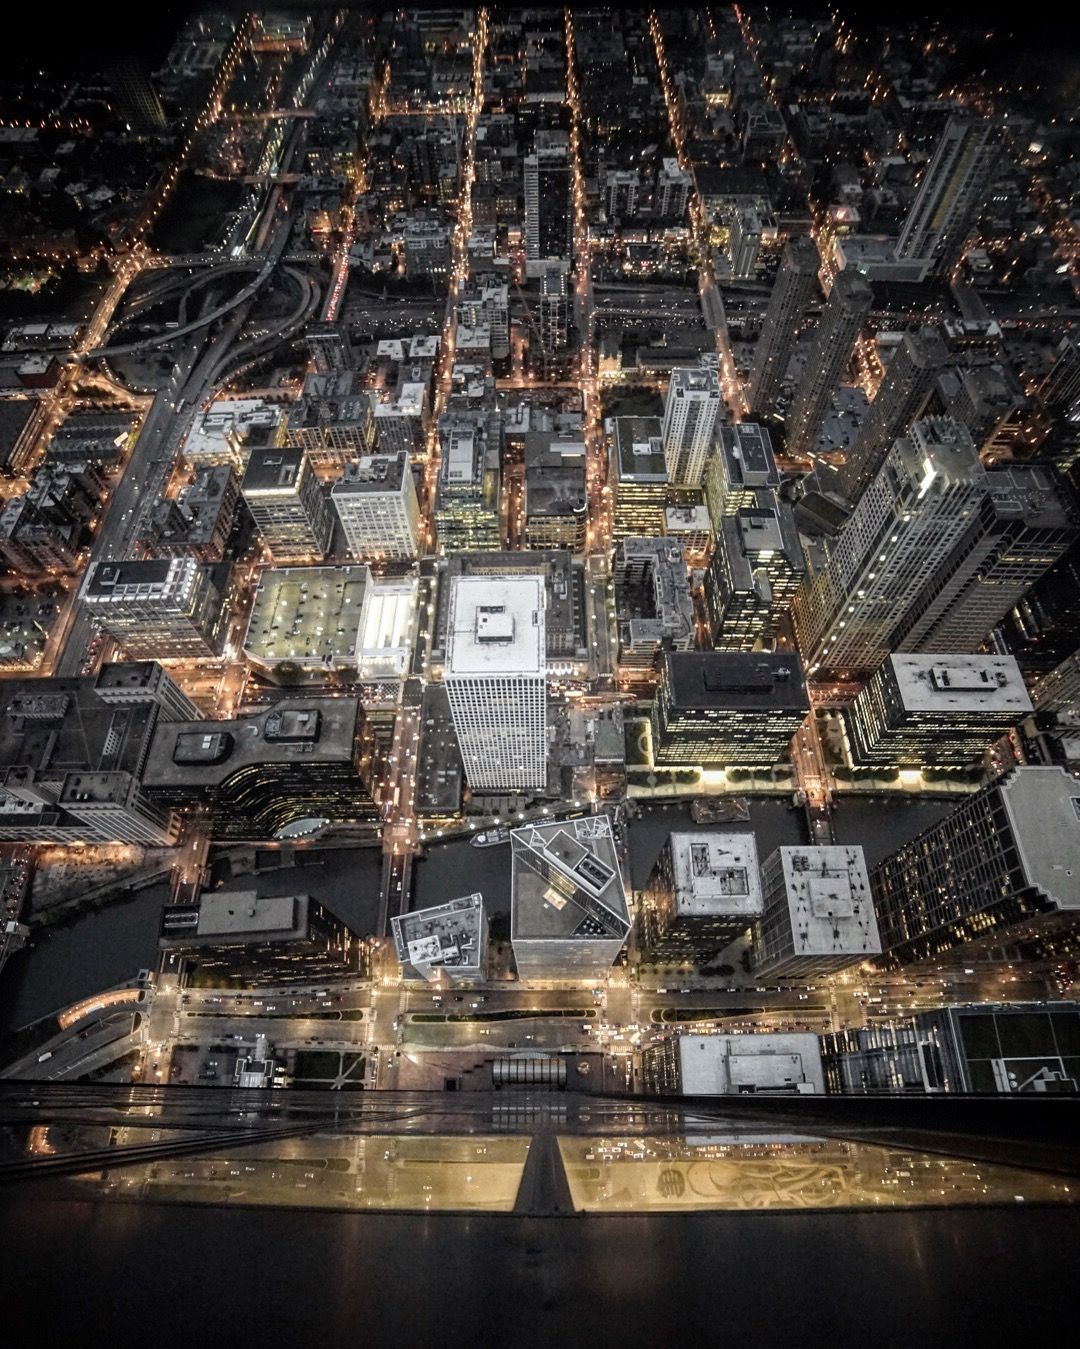 Follow Tatyana Perreault on Instagram for the latest in her aerial photography